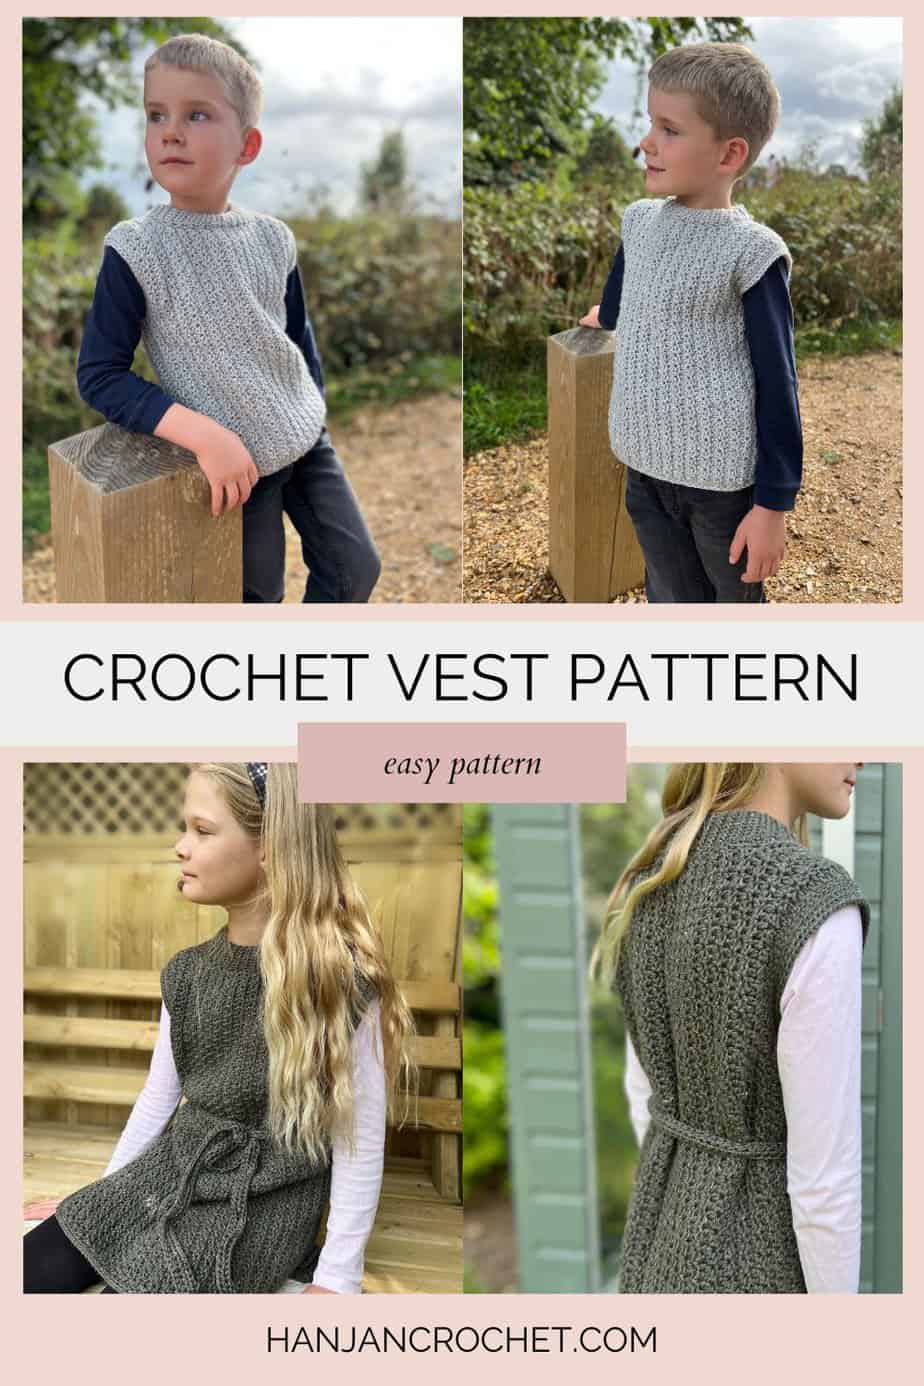 Four images of crochet baby vest pattern in sizes up to age 10 years.